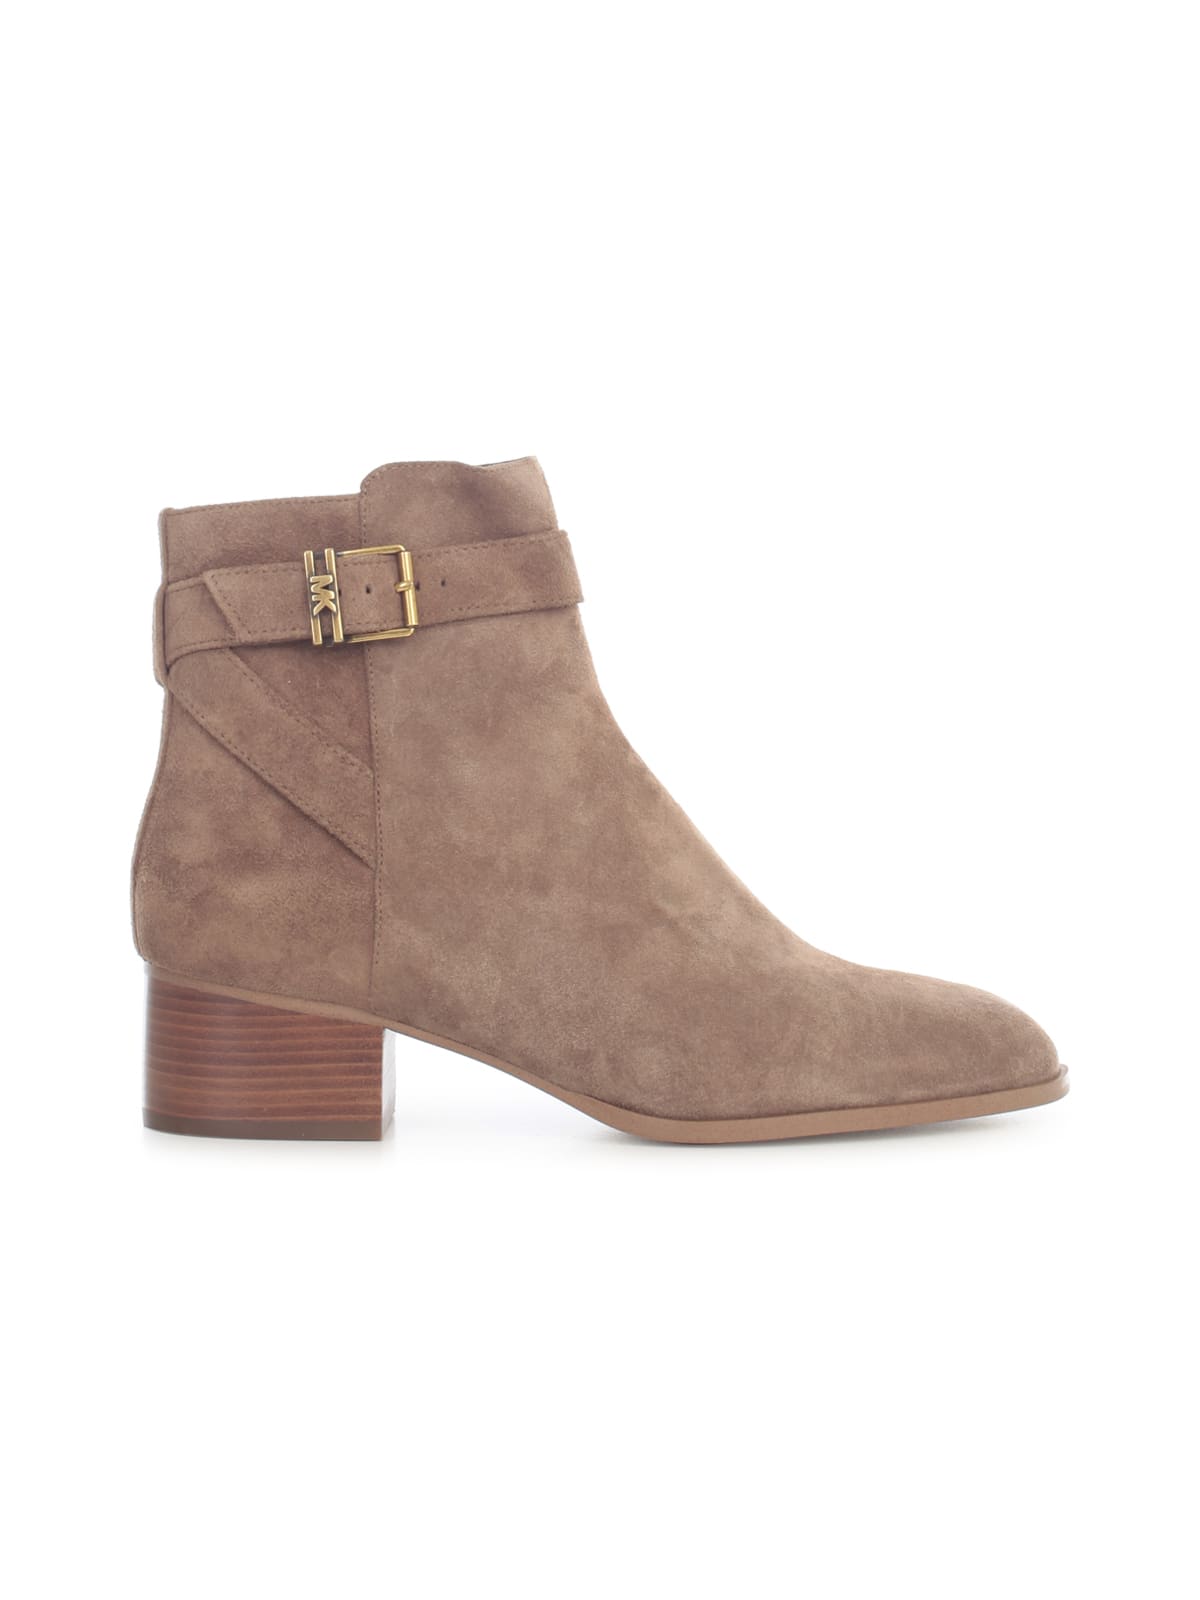 Buy MICHAEL Michael Kors Suede Britten Ankle Boot online, shop MICHAEL Michael Kors shoes with free shipping